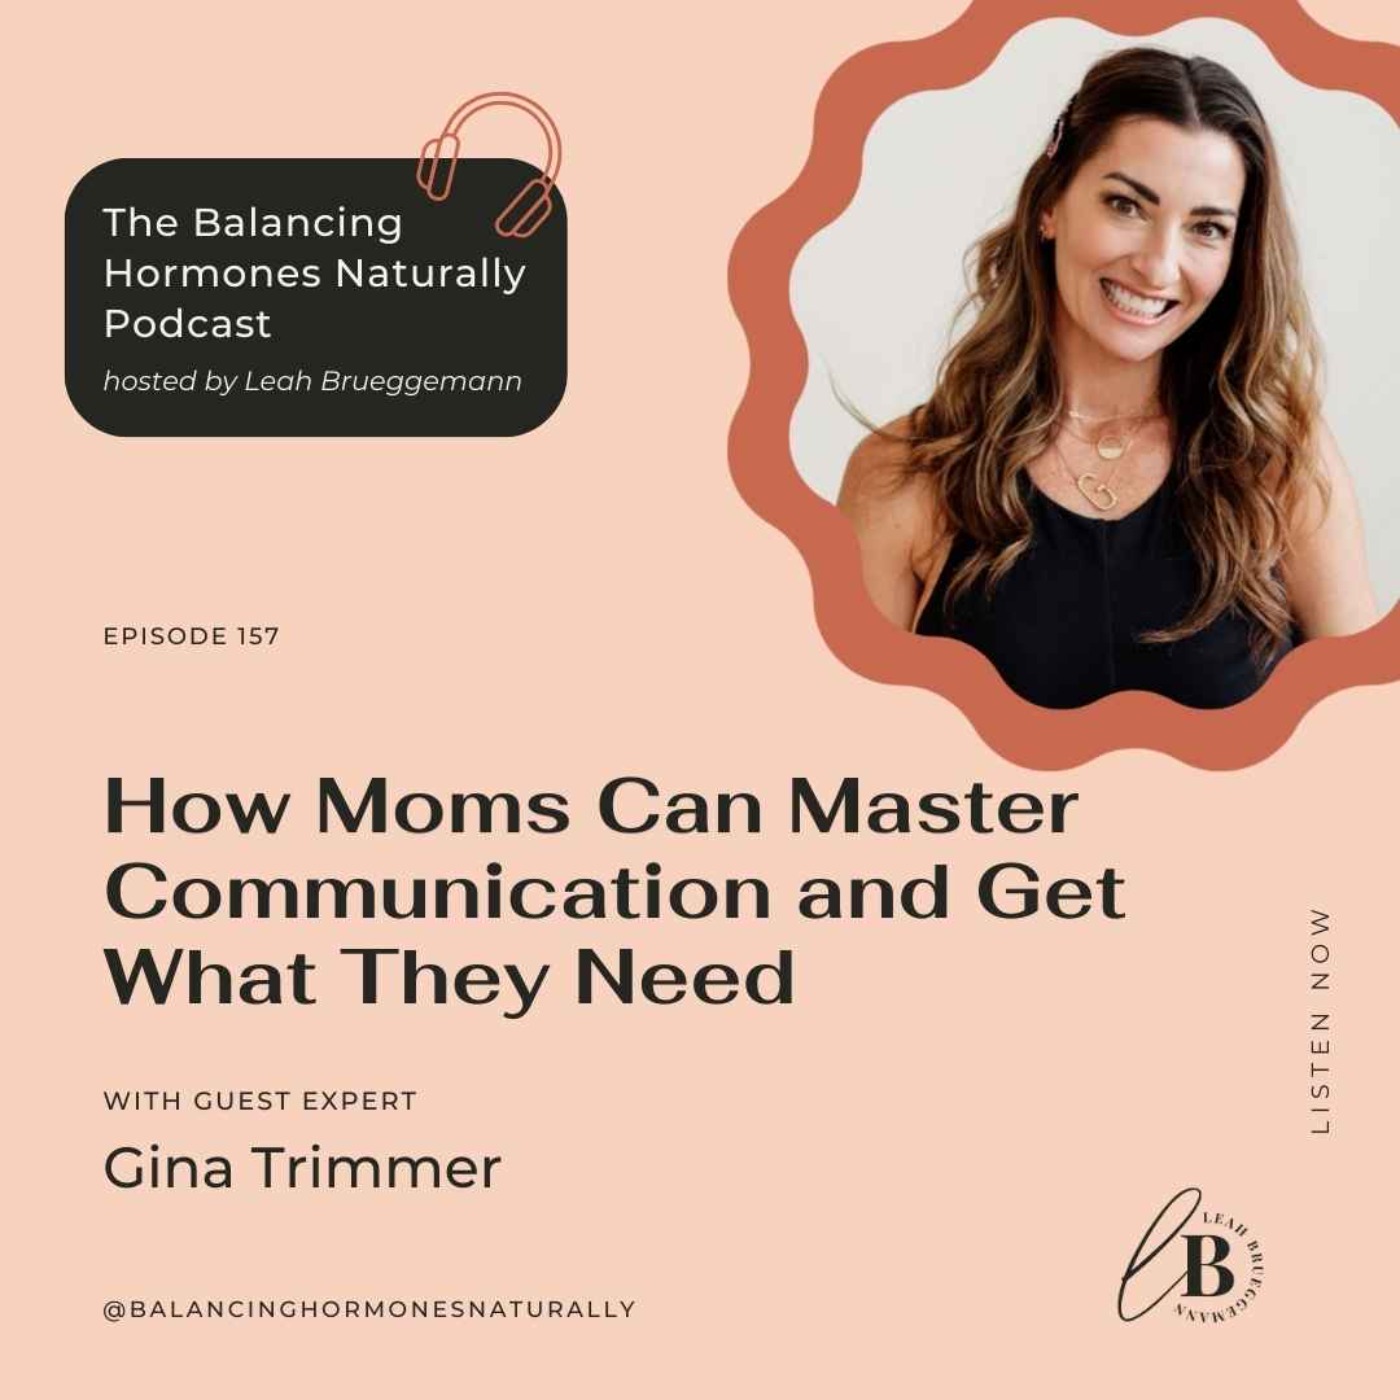 Episode 157: How Moms Can Master Communication and Get What They Need